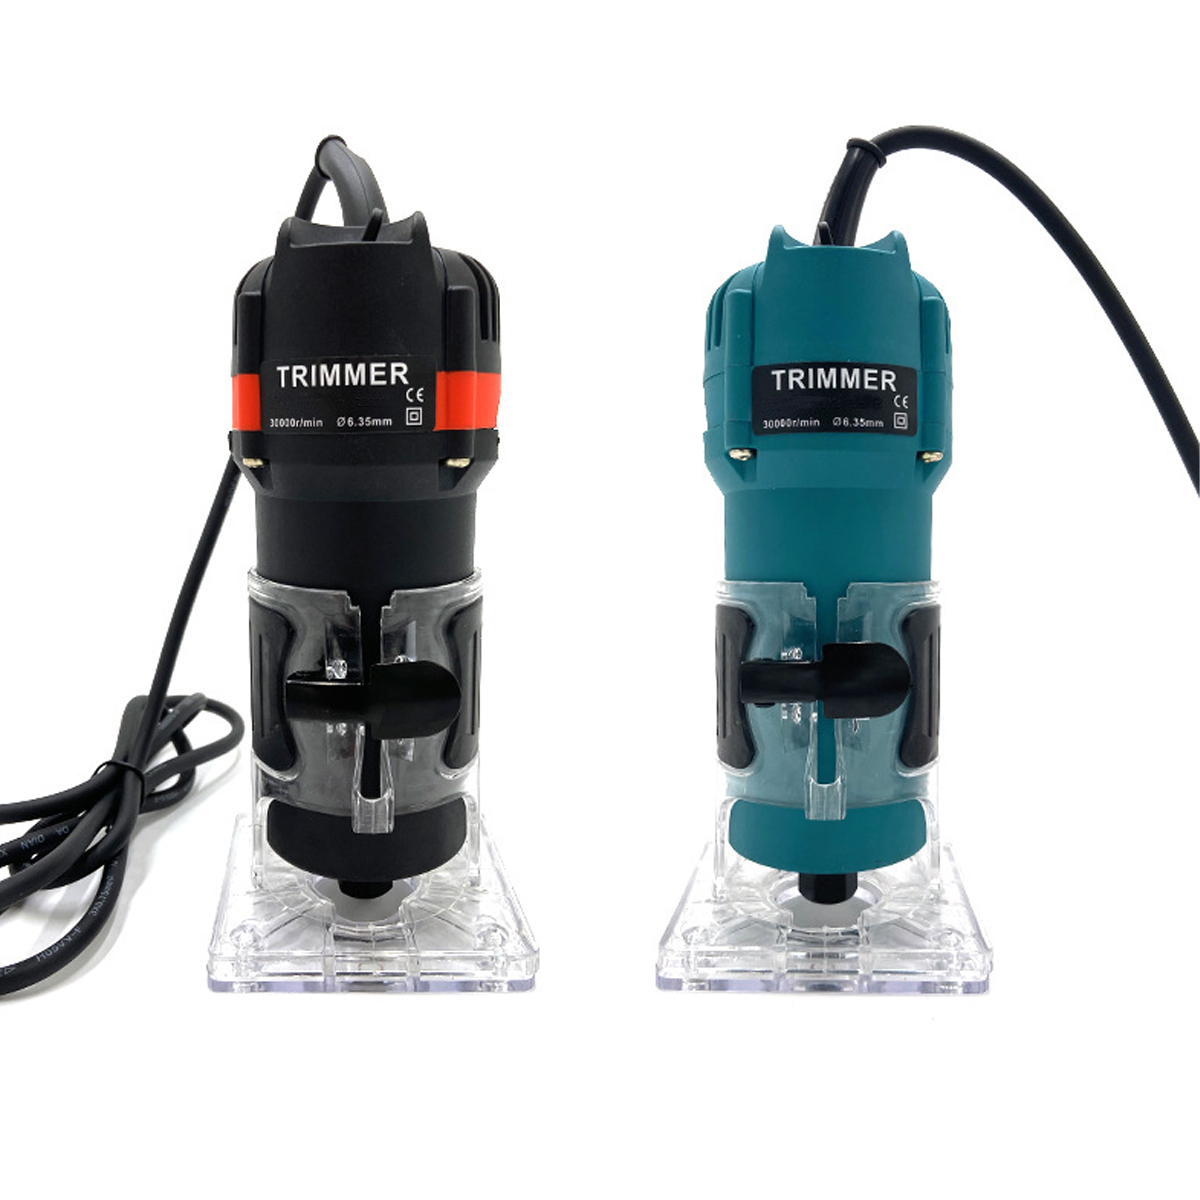 110V220V-30000RPM-Electric-Hand-Trimmer-Router-635mm-Wood-Laminate-Palm-Joiners-Working-Cutting-Mach-1735585-14